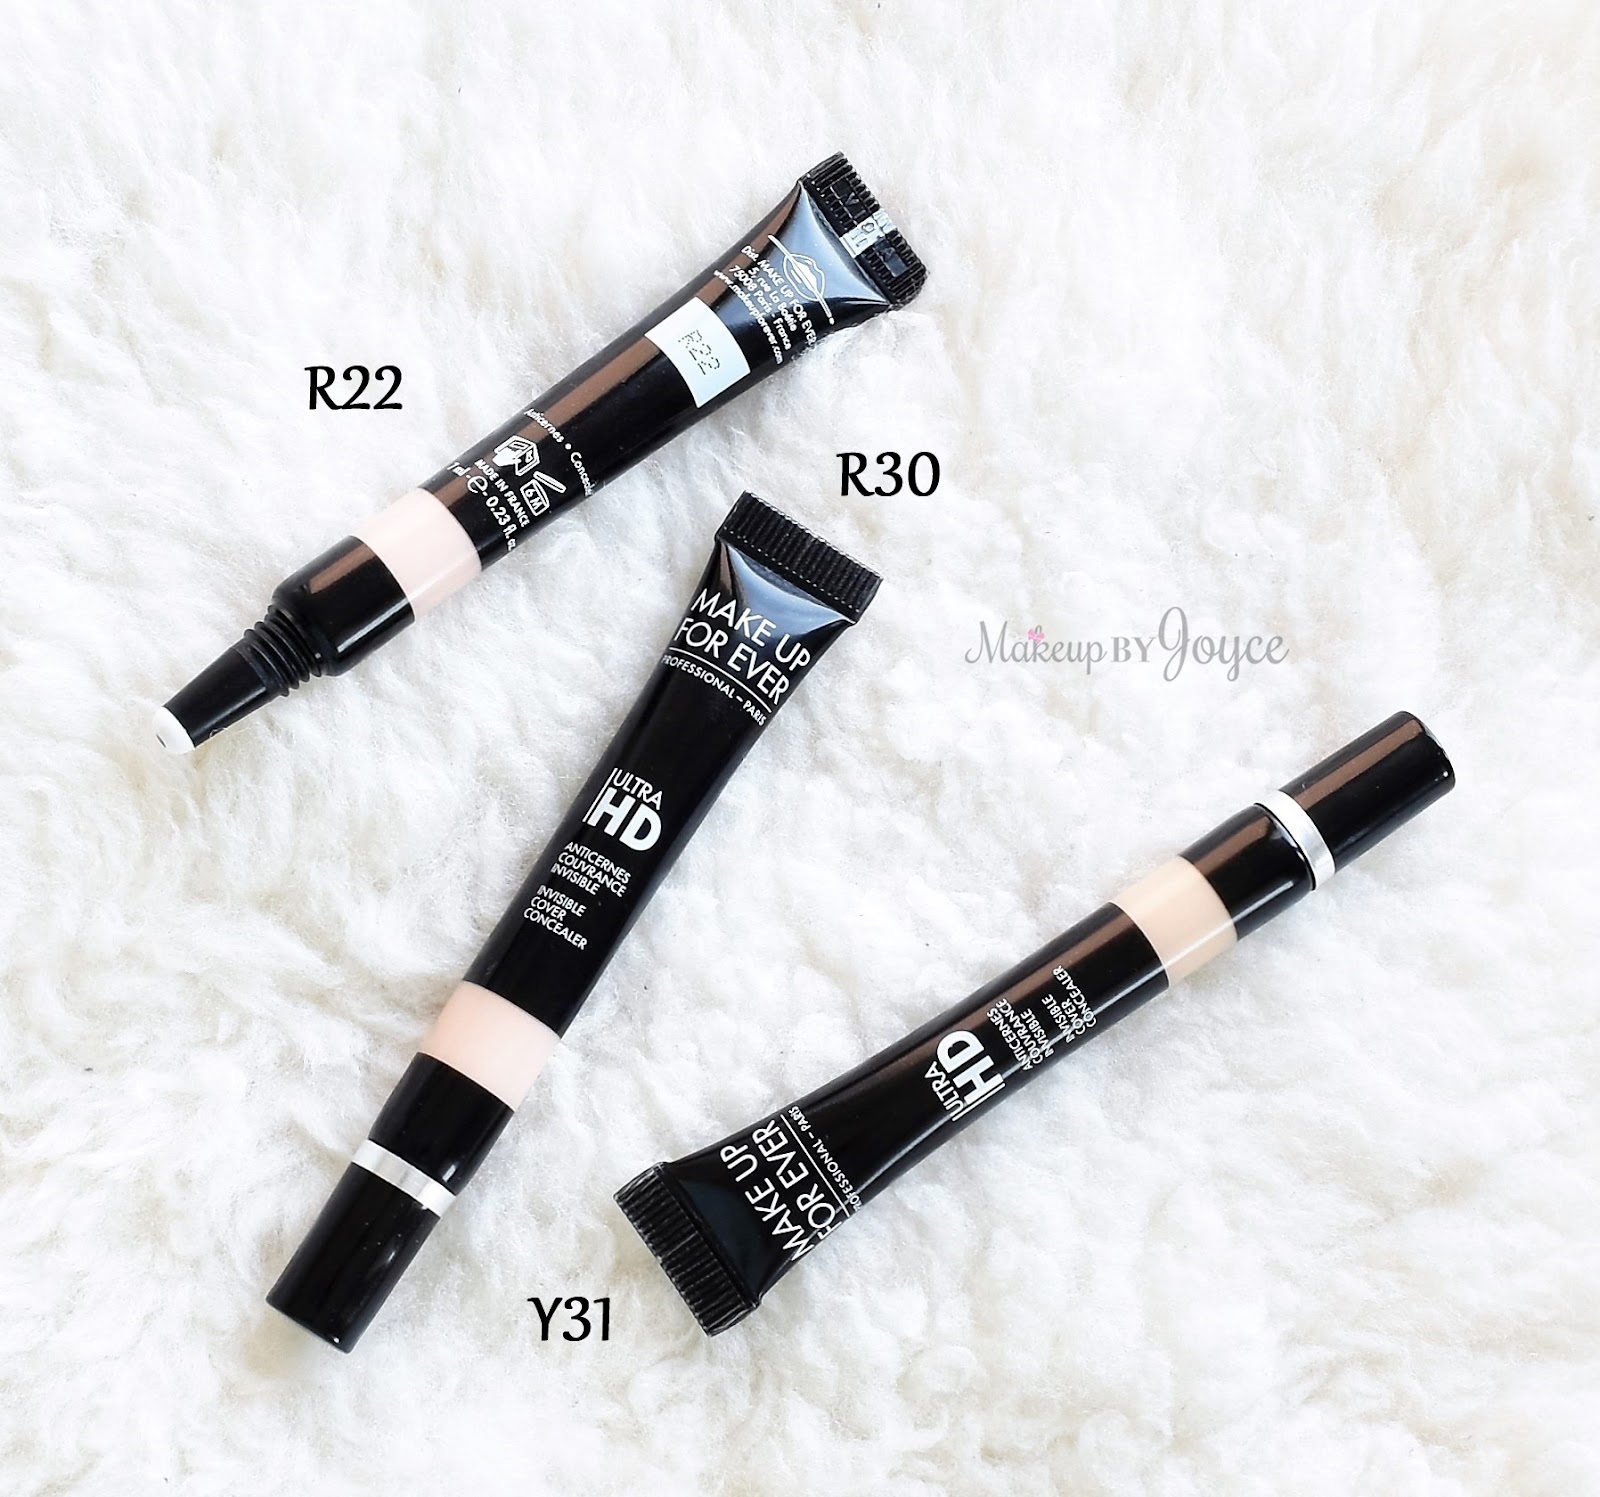 Make Up For Ever Ultra HD Invisible Cover Concealer - Makeup and Beauty Blog